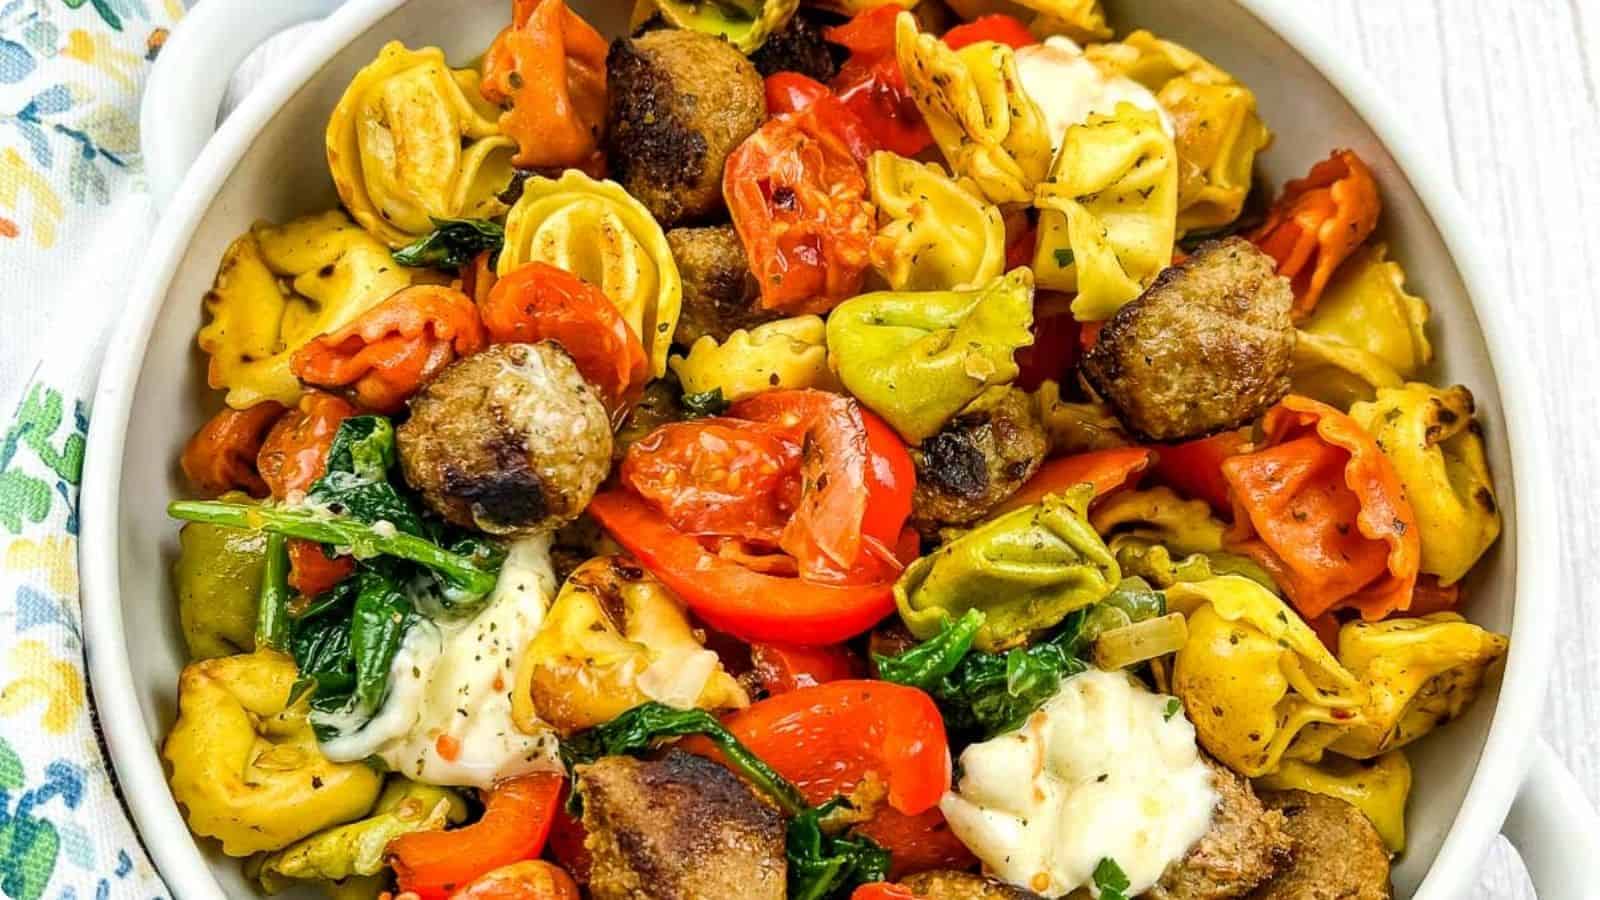 A close-up of a dish featuring colorful tortellini mixed with meatballs, spinach, and chopped red bell peppers, topped with melted cheese, served in a white bowl.